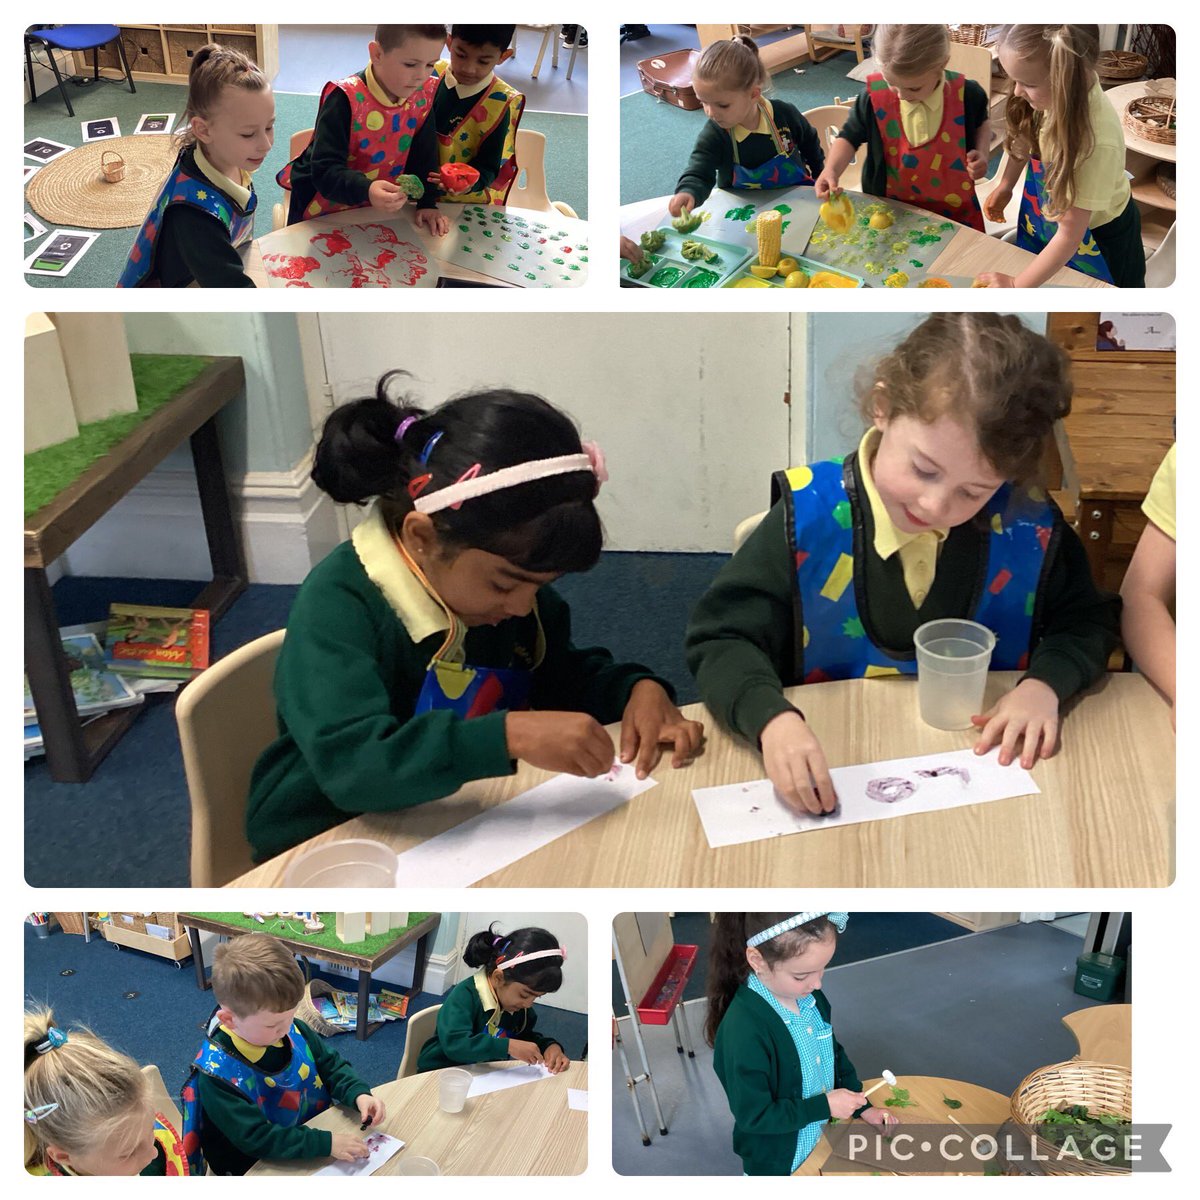 We had a wonderful immersion day on Tuesday in #DosbarthGlas! We had a visit from the Vale of Glamorgan Waste Management Team and learnt all about recycling, we made soup, we printed with vegetables and painted using paint made from beetroot and blackberries.♻️🌎